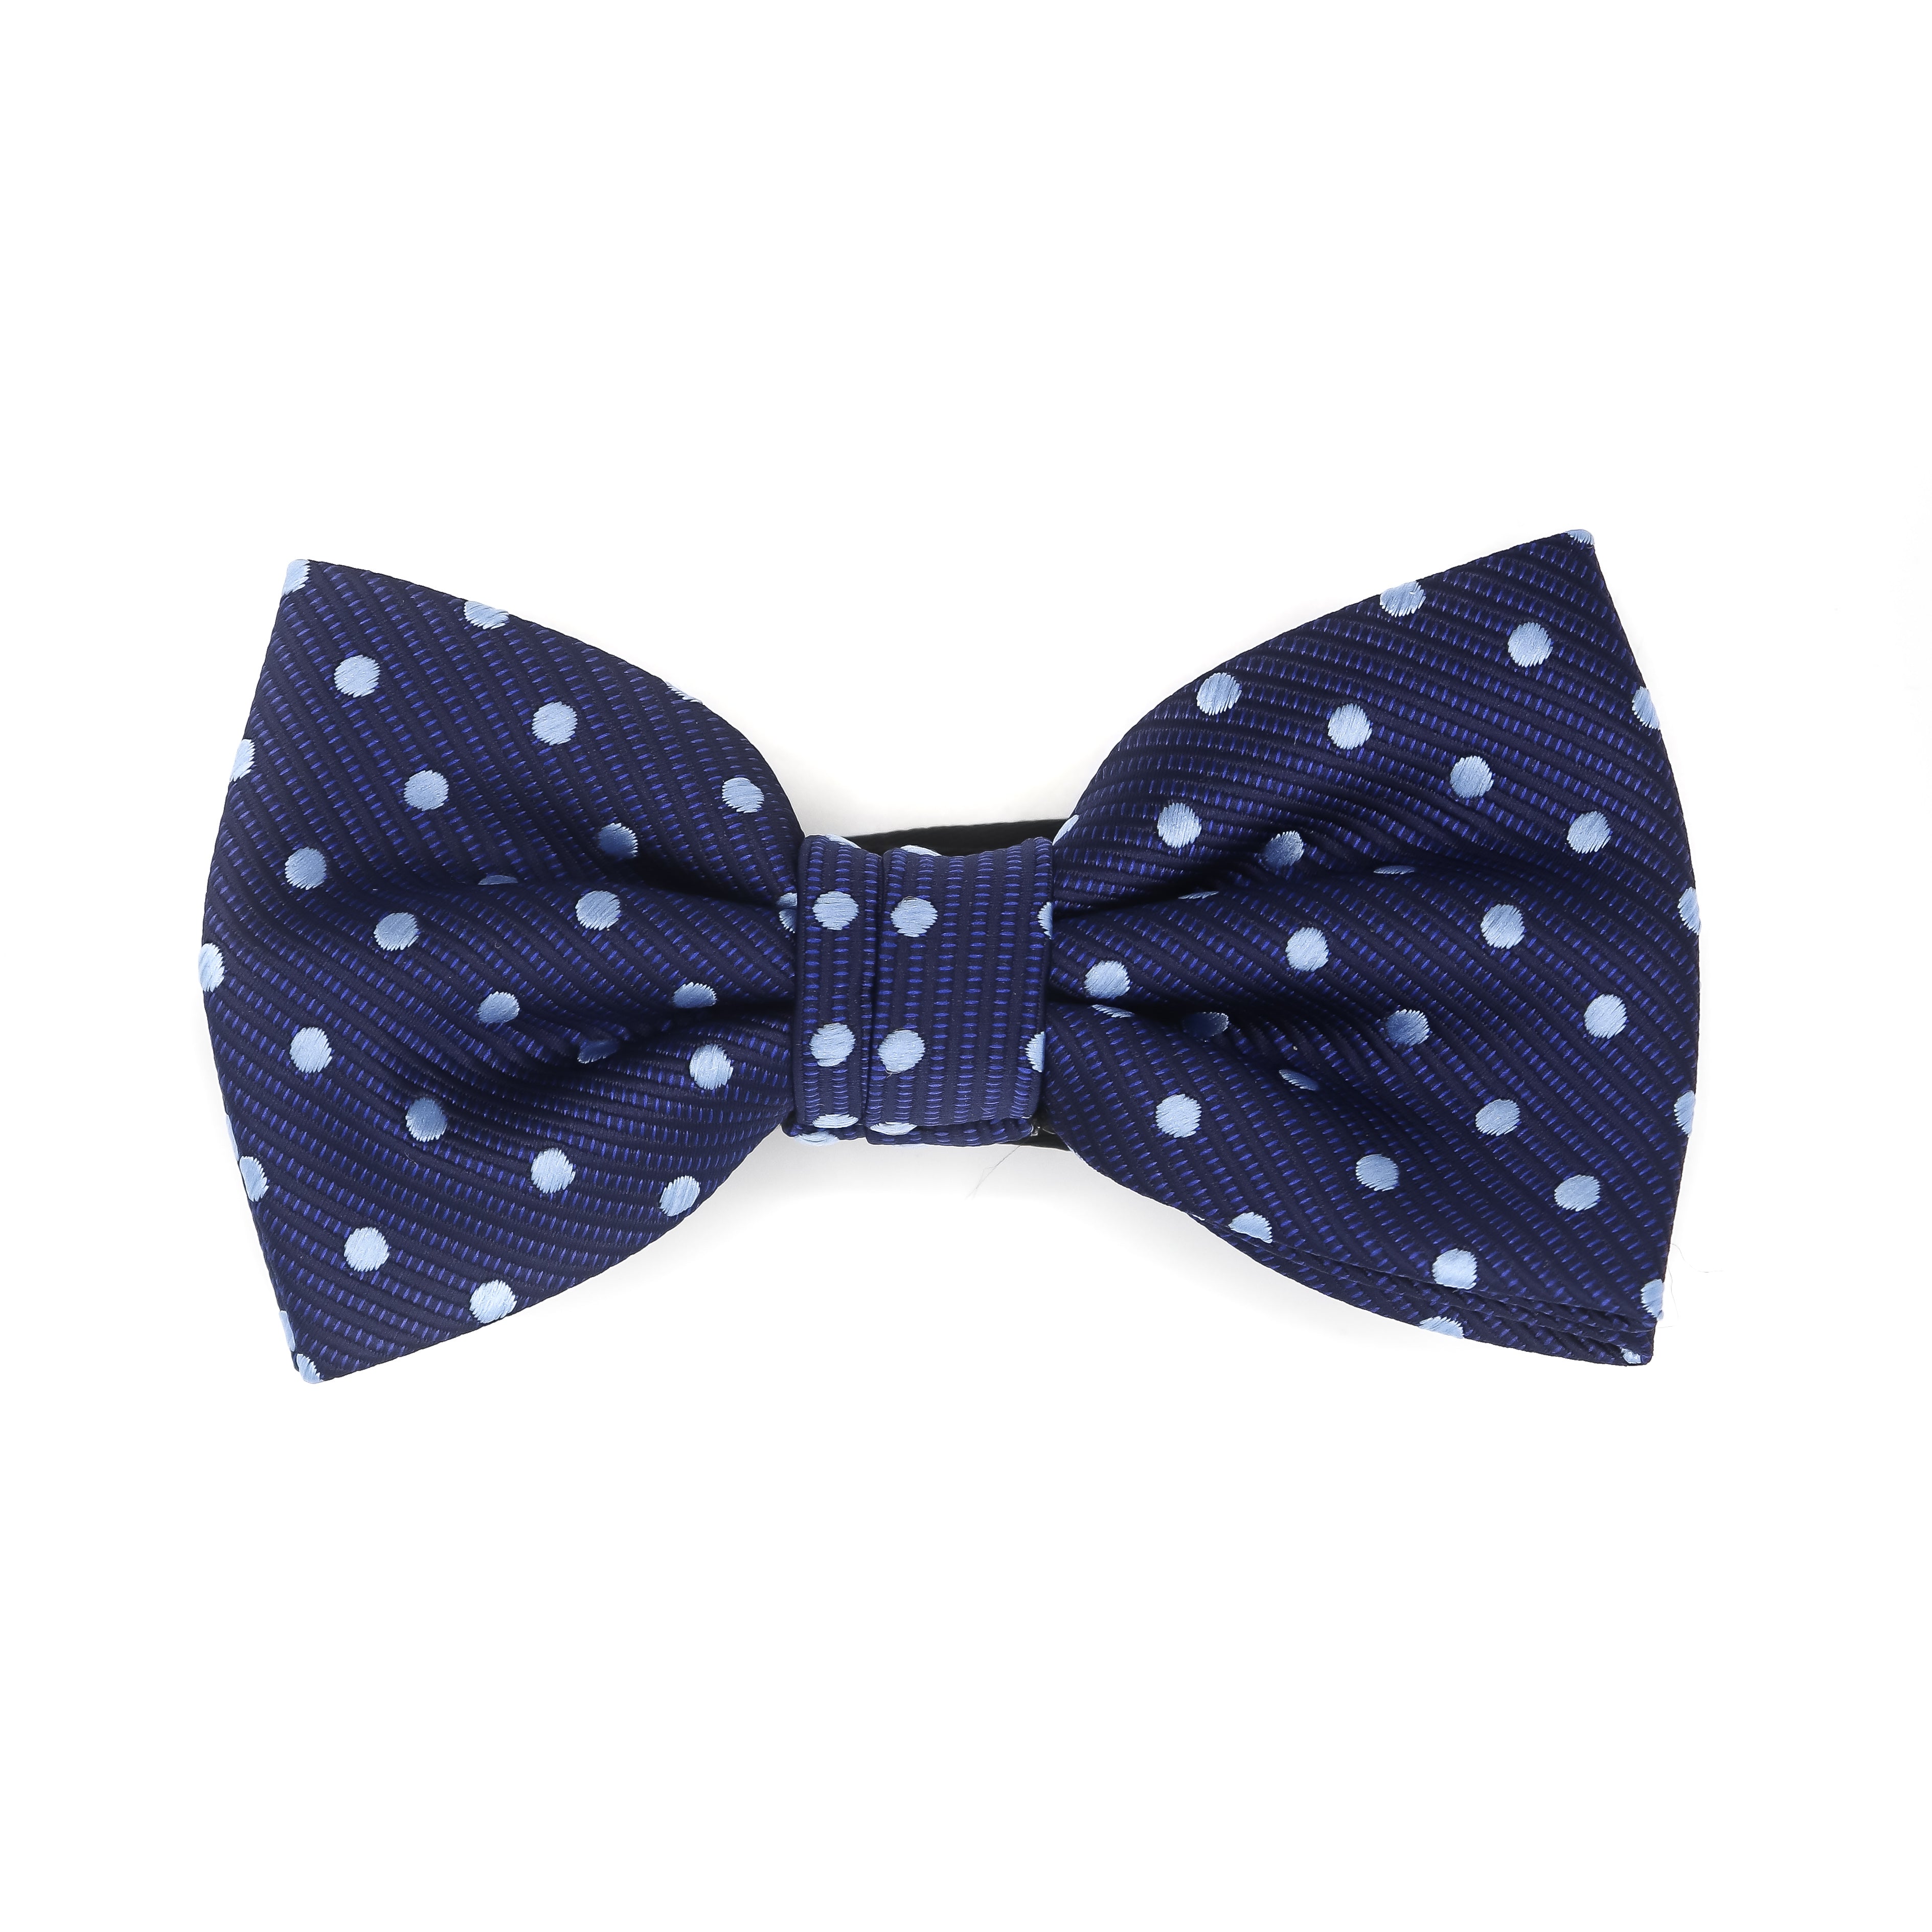 Make Your Point in Bow Tie